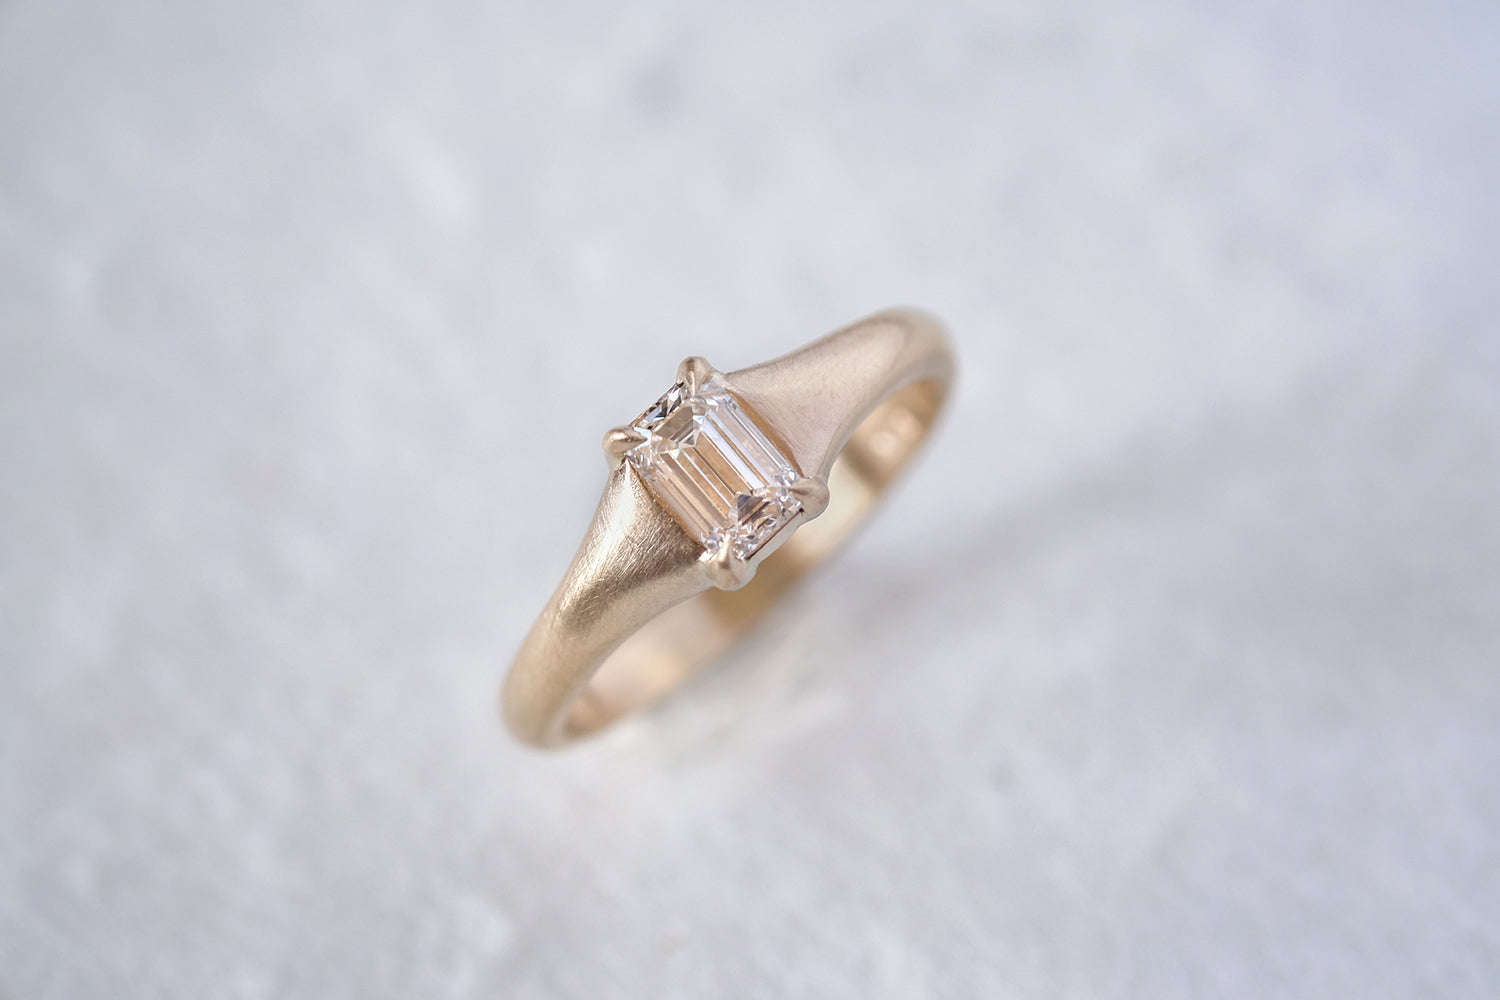 Engagement Gold Ring Set With A Diamond - Emerald Cut